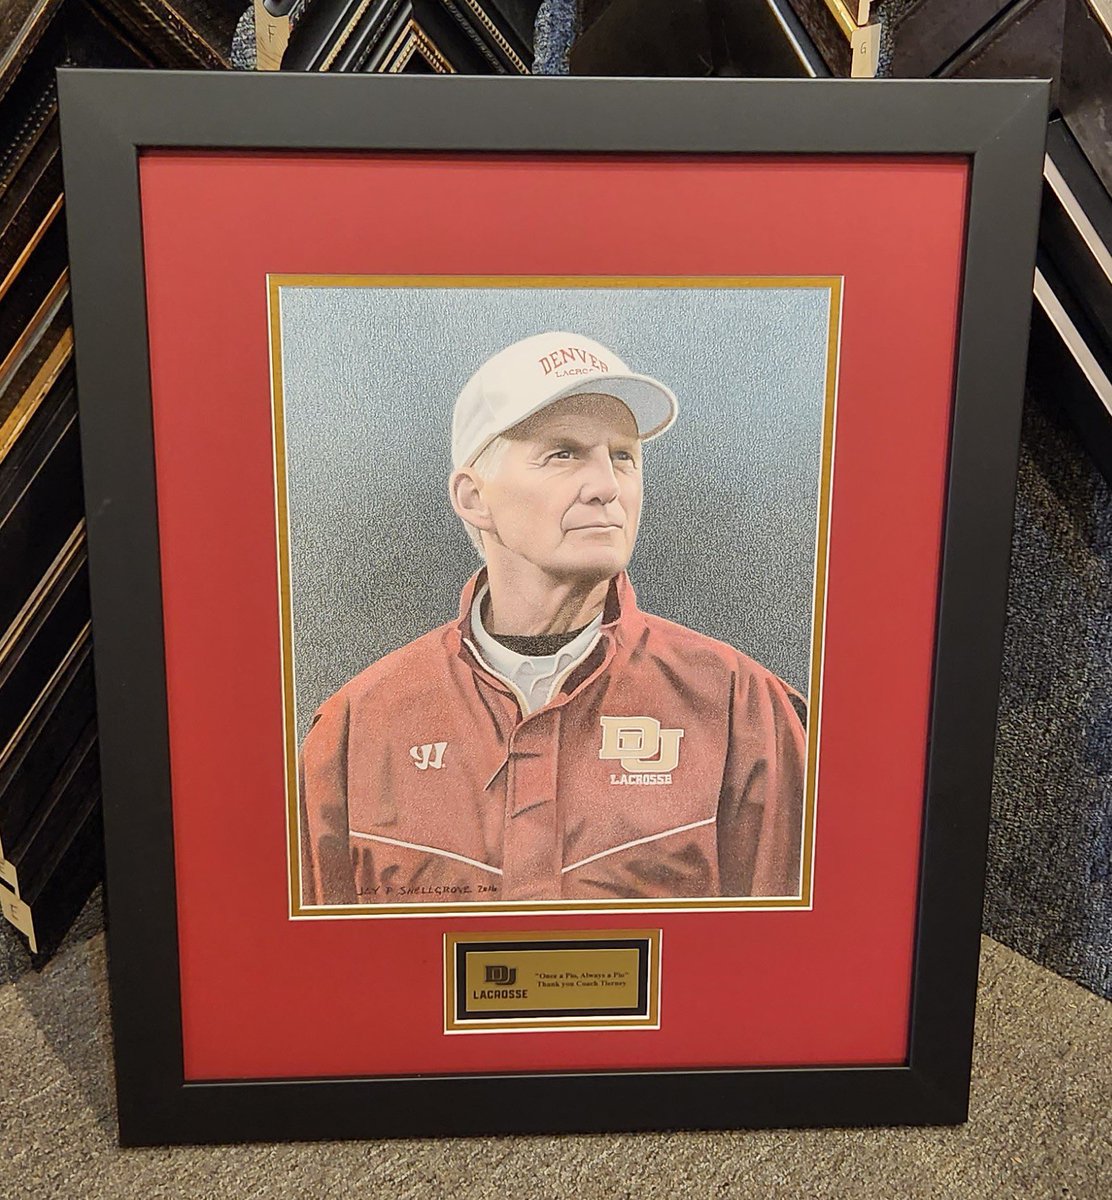 Congratulations DU Lacrosse Head Coach! We were honored to frame this for Artist Jay Snellgrove as he presented his original drawing to Coach Tierney for #BillTierneyDay

#GOPIOS #Lacrosse #LAX #UniversityofDenver 
@DUCoachTierney
@DU_MLAX
@TylerMaun
@coach_mtbrown
@TruVueGlazing